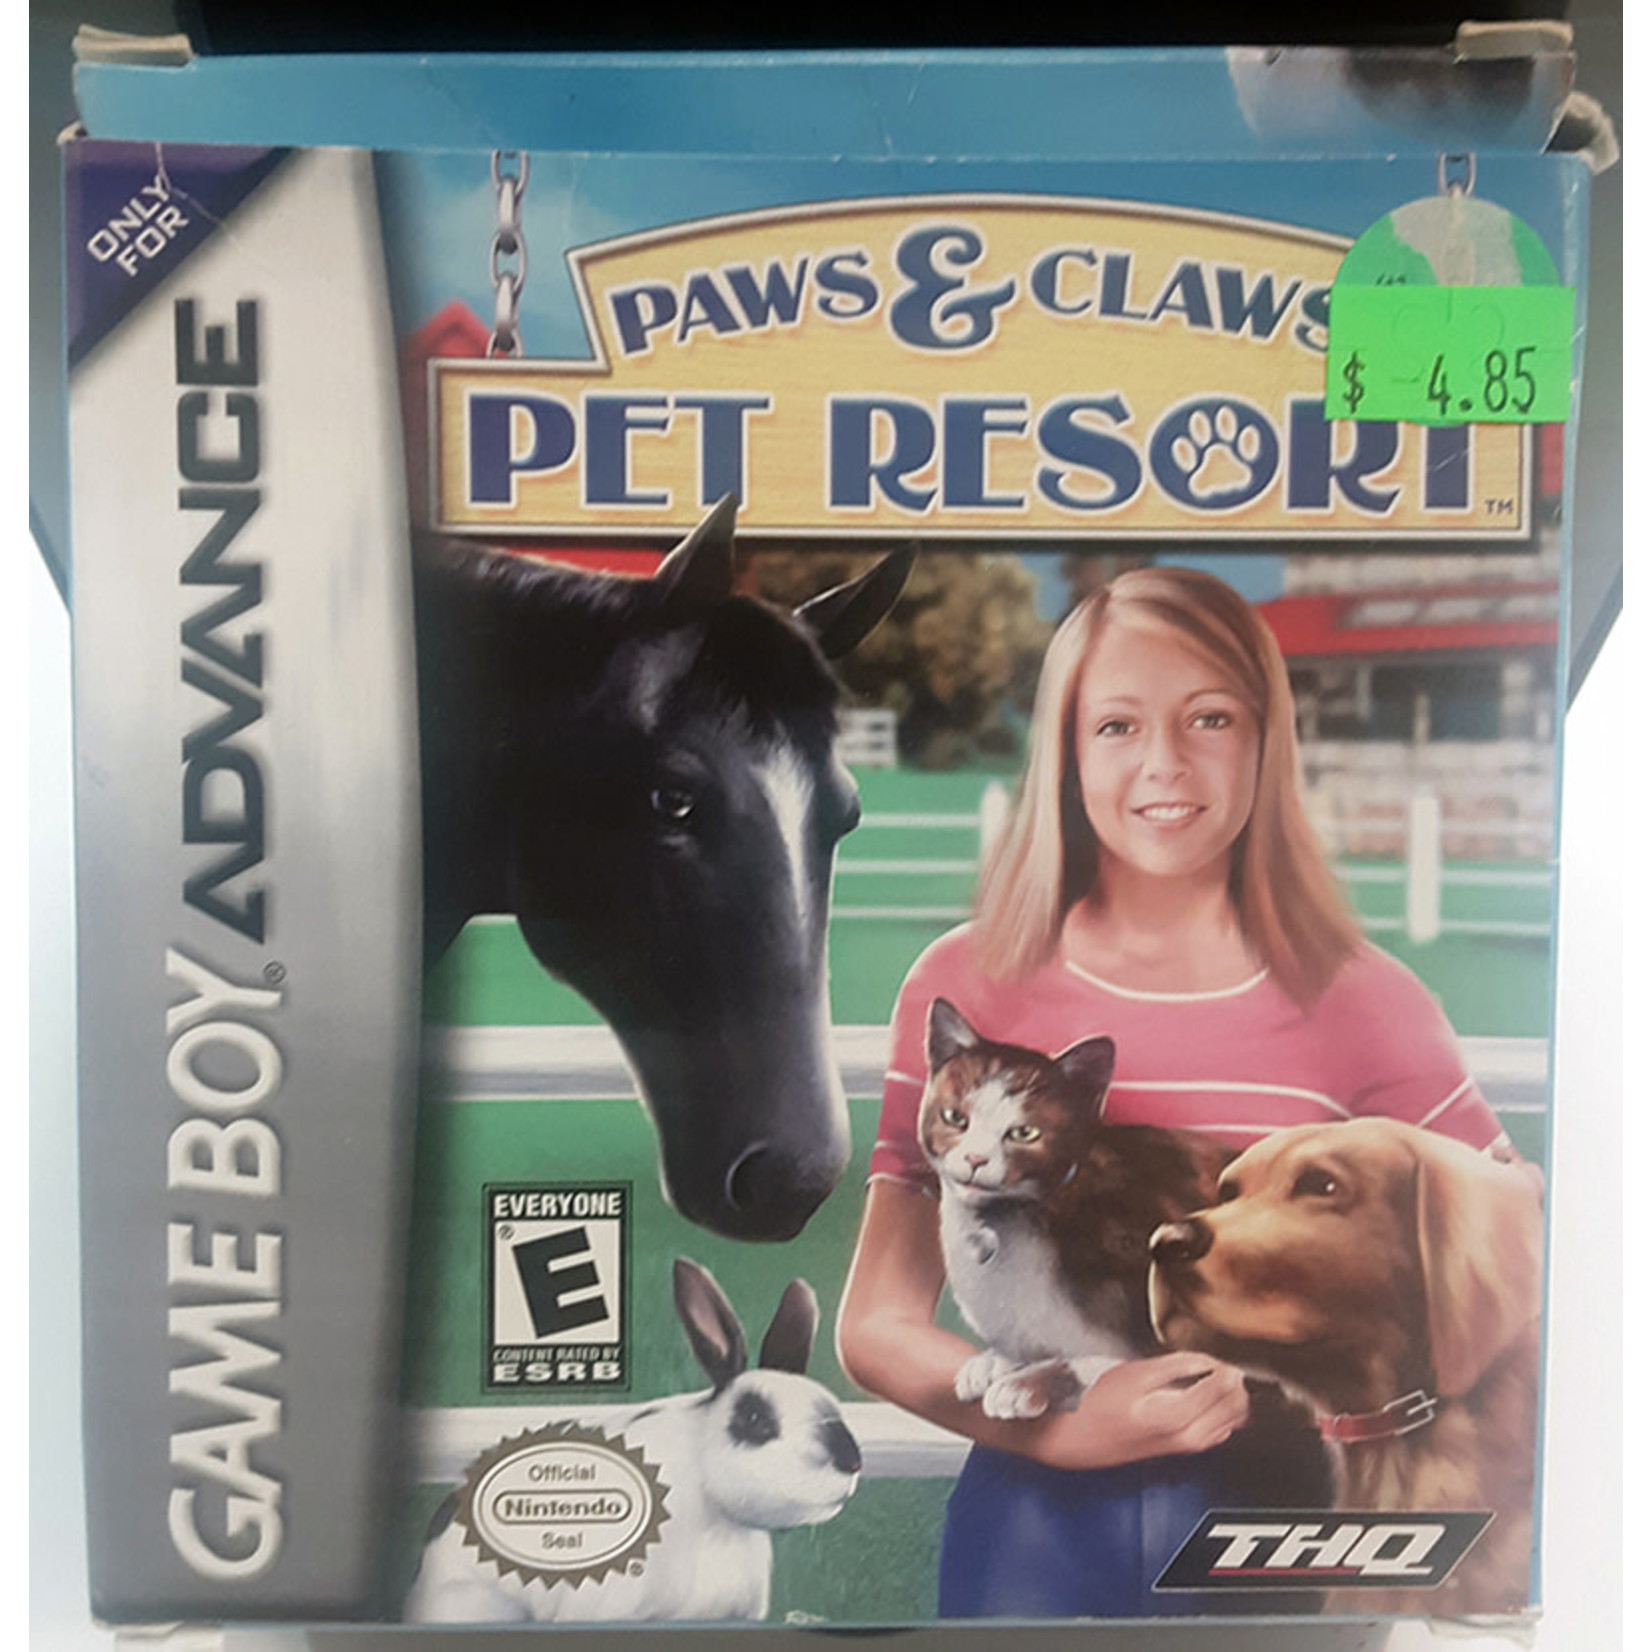 gbau-Paws & Claws Pet Resort (in box)